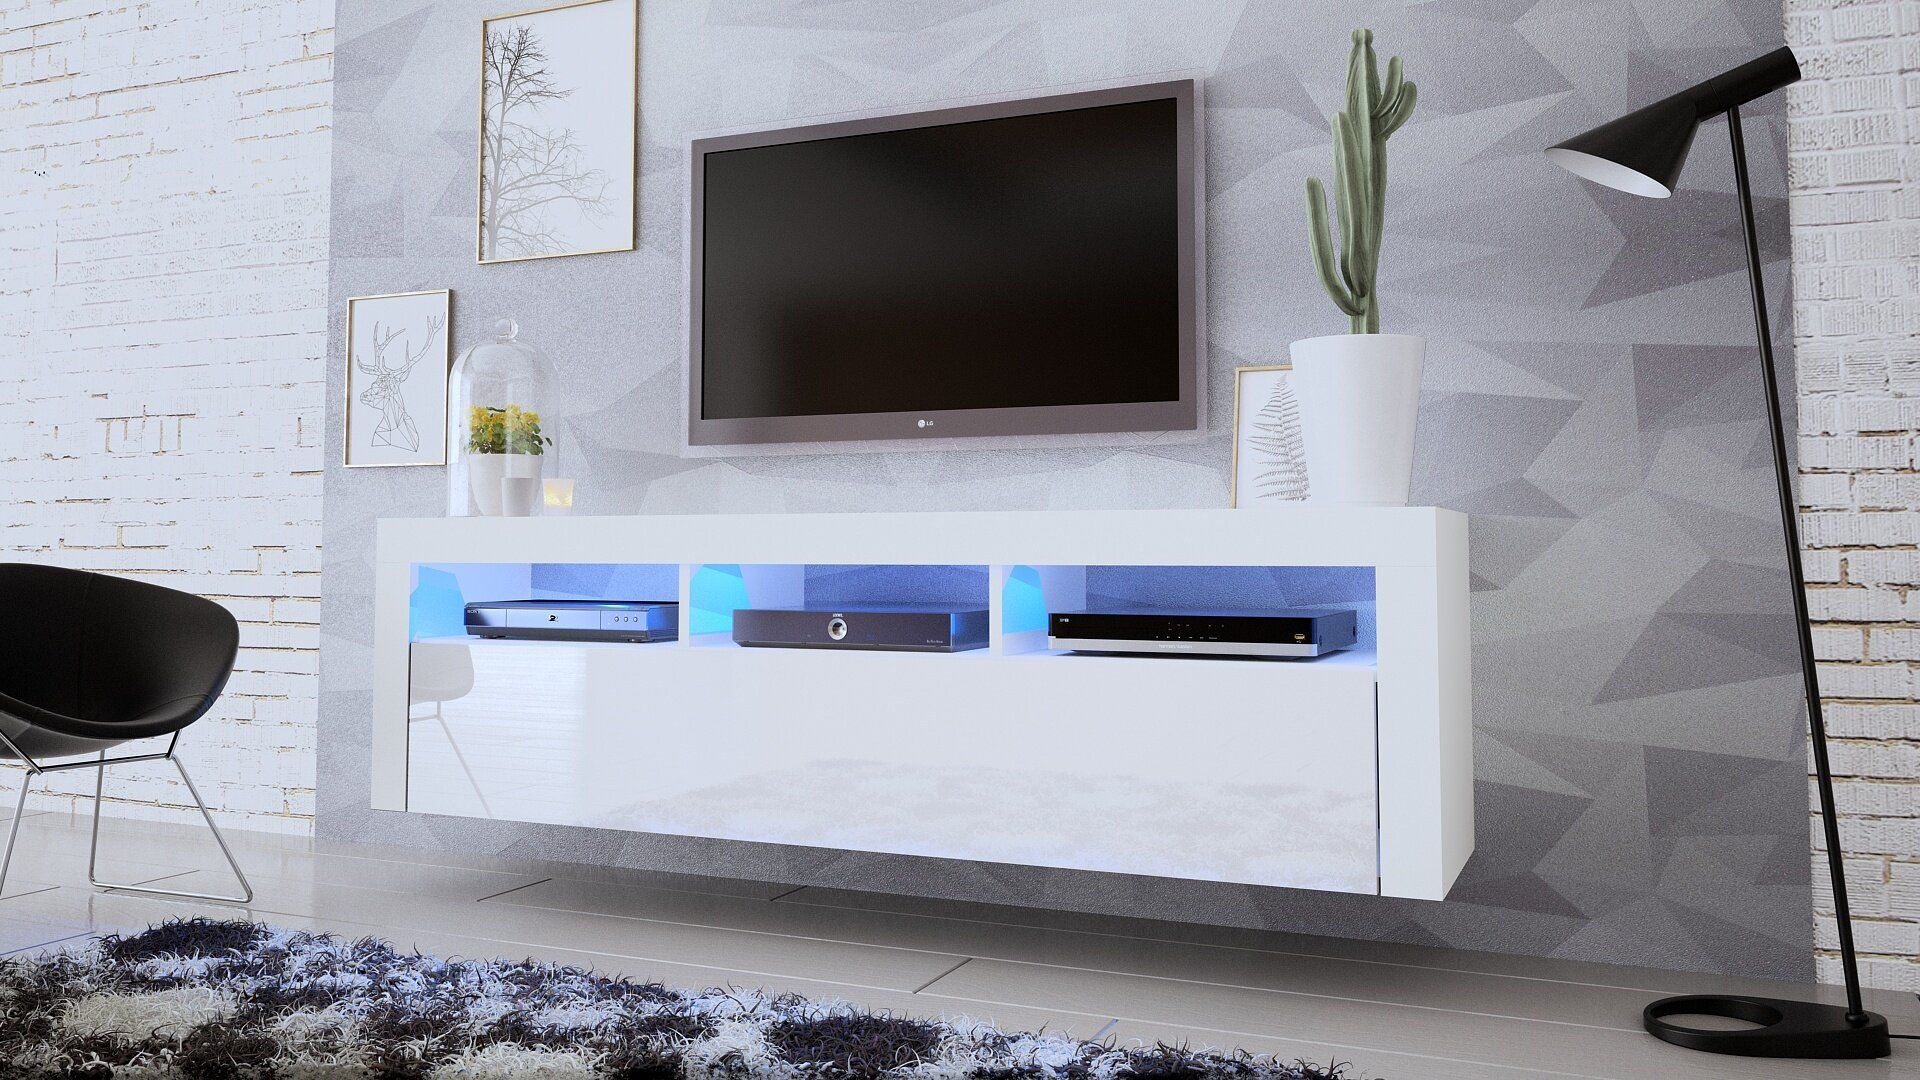 72 Inch Tv Stand You'll Love In 2019 | Wayfair Throughout Creola 72" Tv Stands (View 4 of 5)